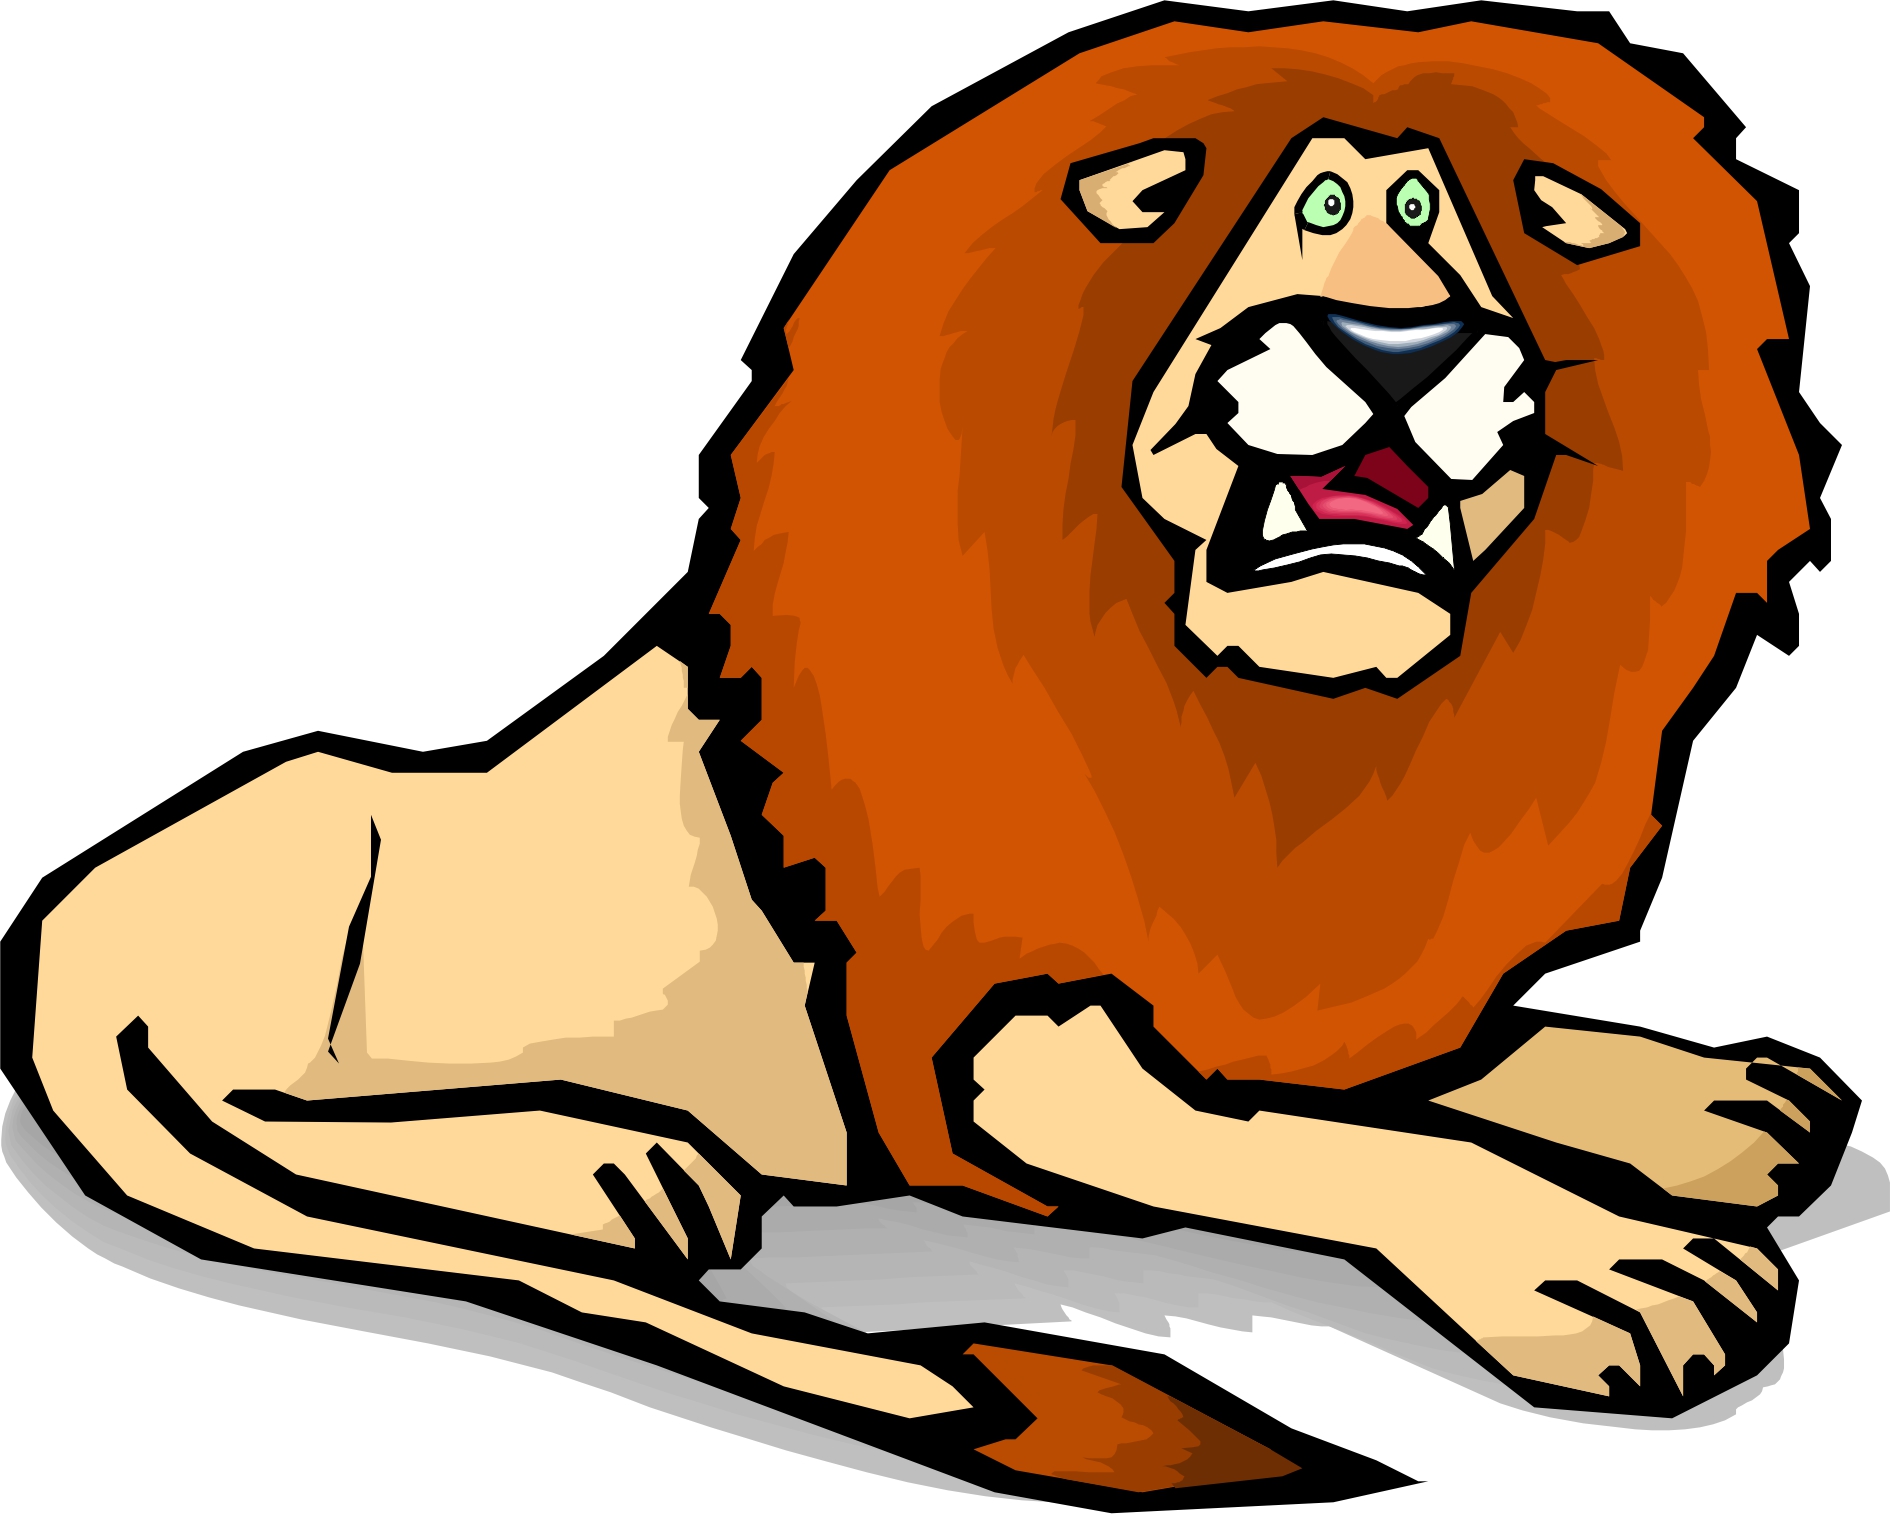 Scared lion clipart 